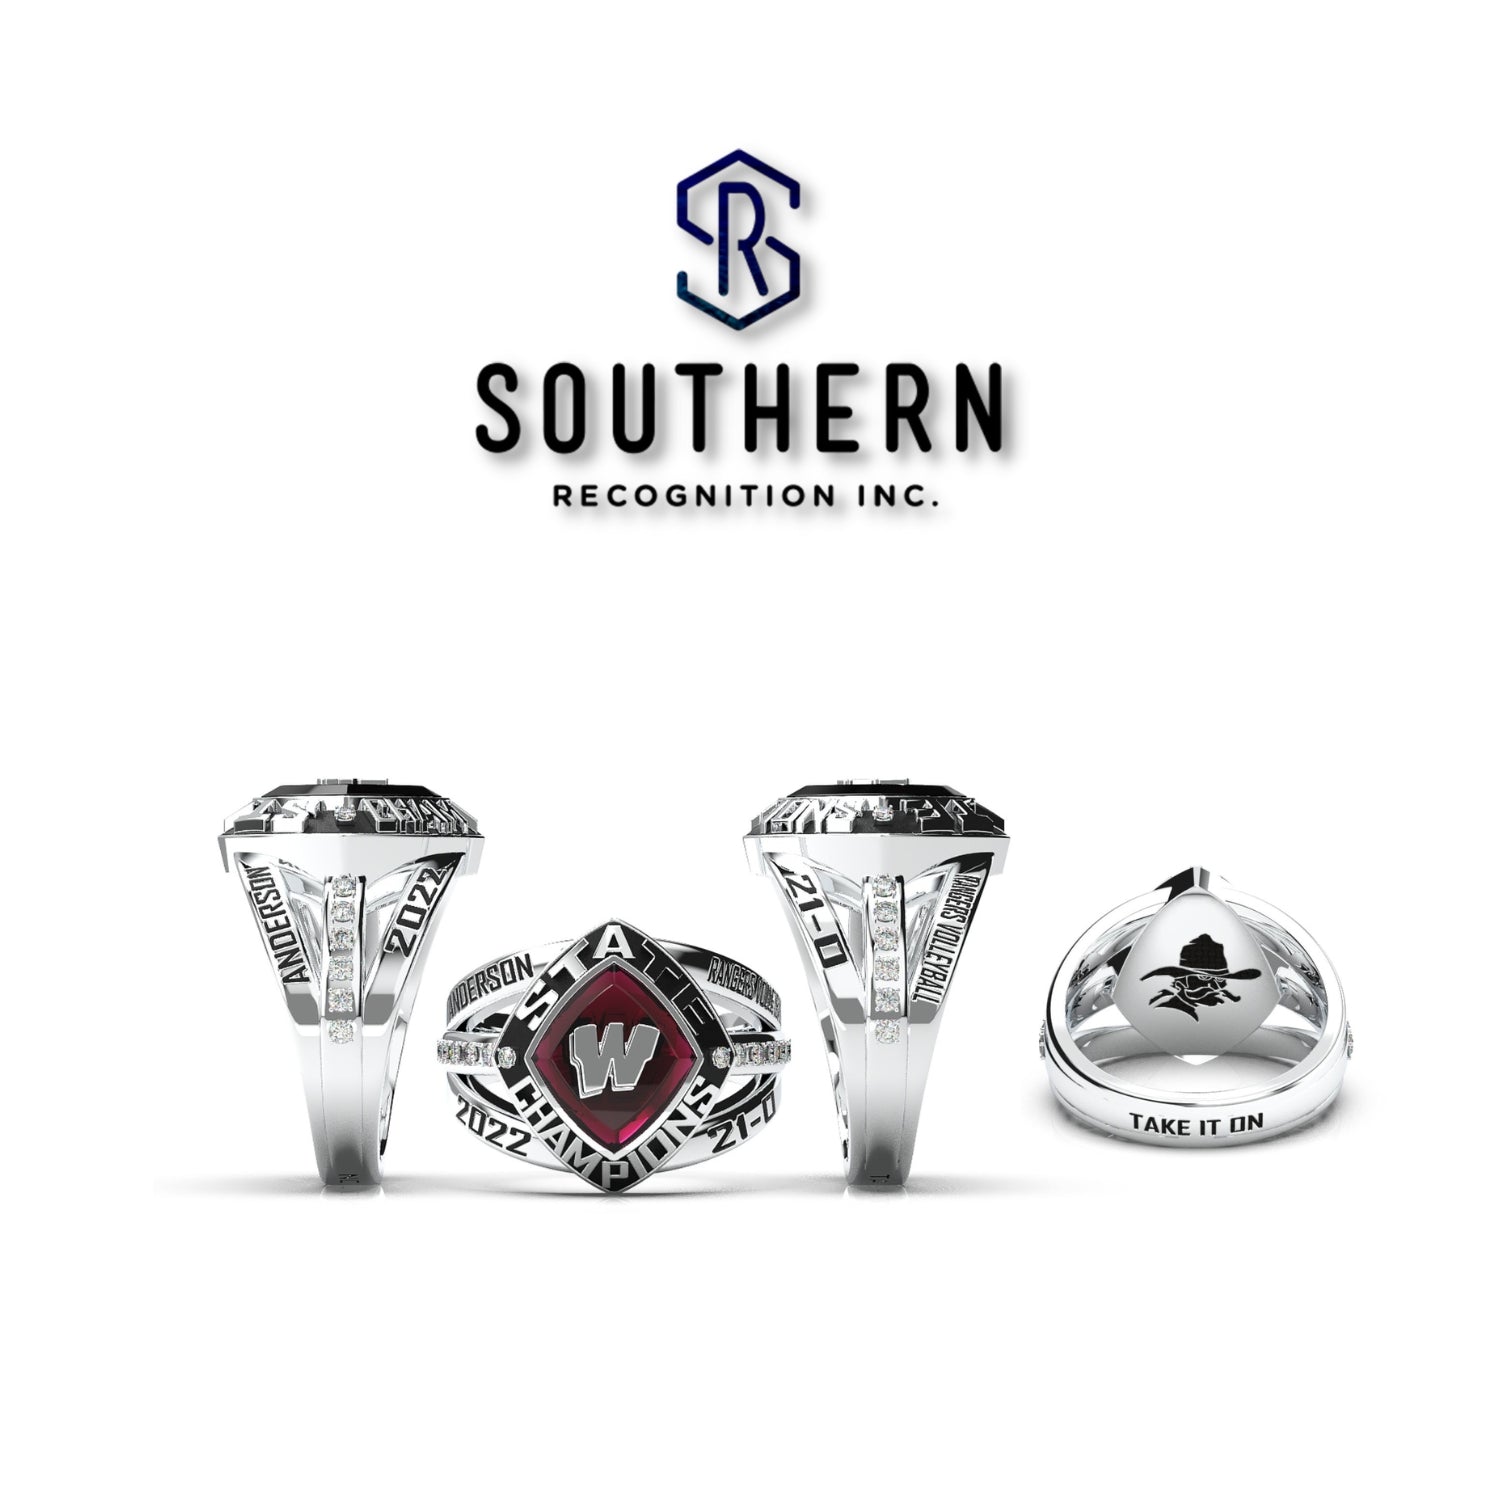 Westcliff University Water Polo National Championship Ring – Southern  Recognition, Inc.